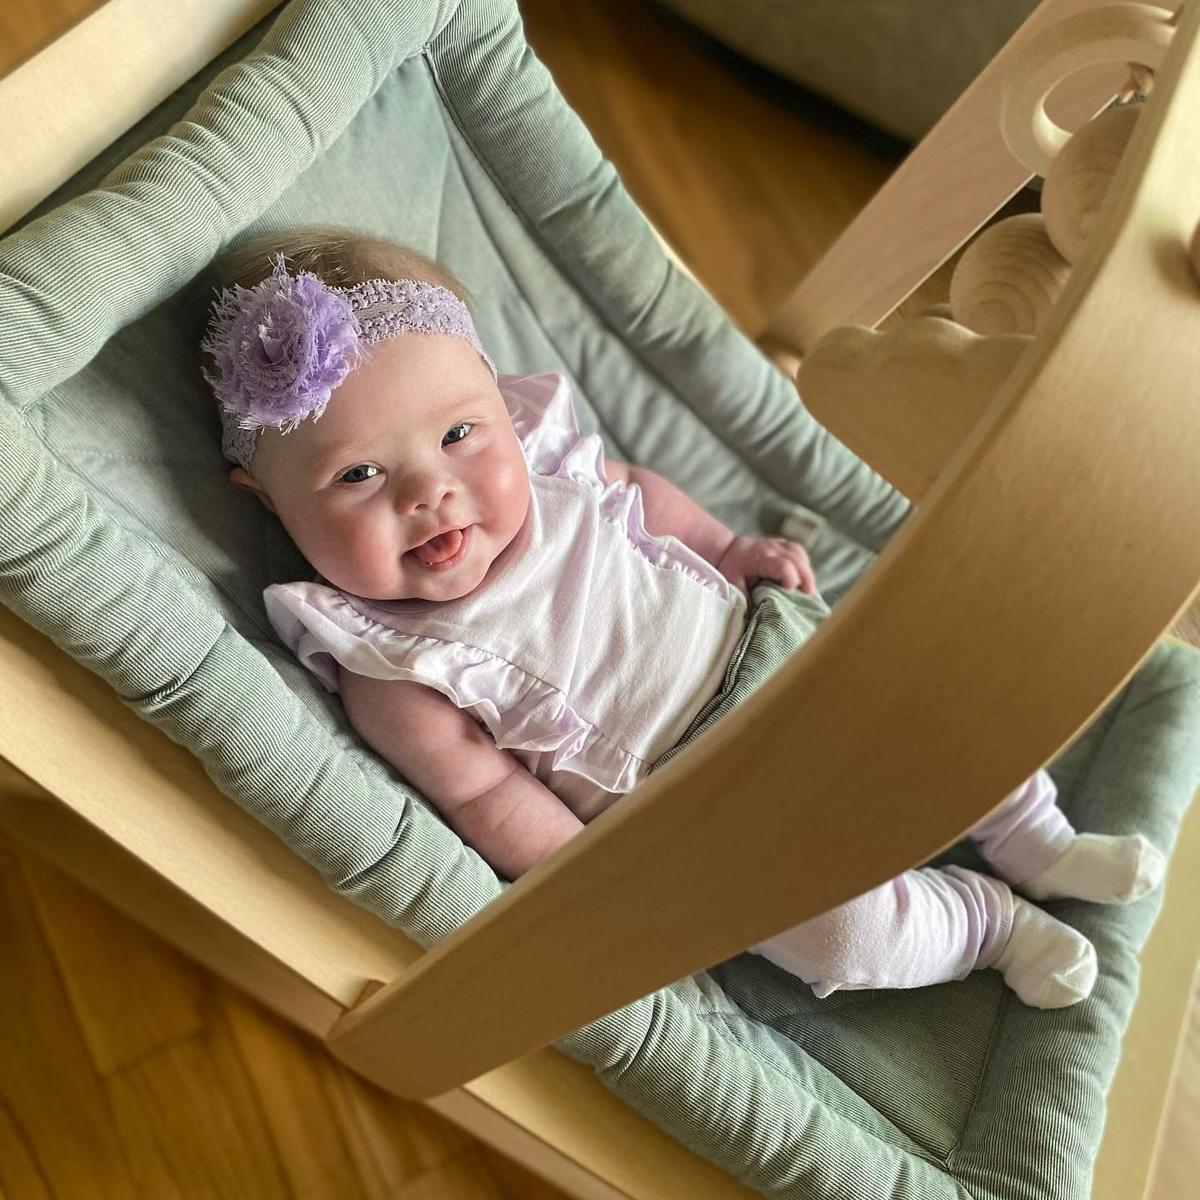 Baby Millie was born at the end of November 2020; she had a multi-cystic kidney and a possible heart defect. (Courtesy of <a href="https://www.instagram.com/makingmilliestones/">Nikki Geib</a>)